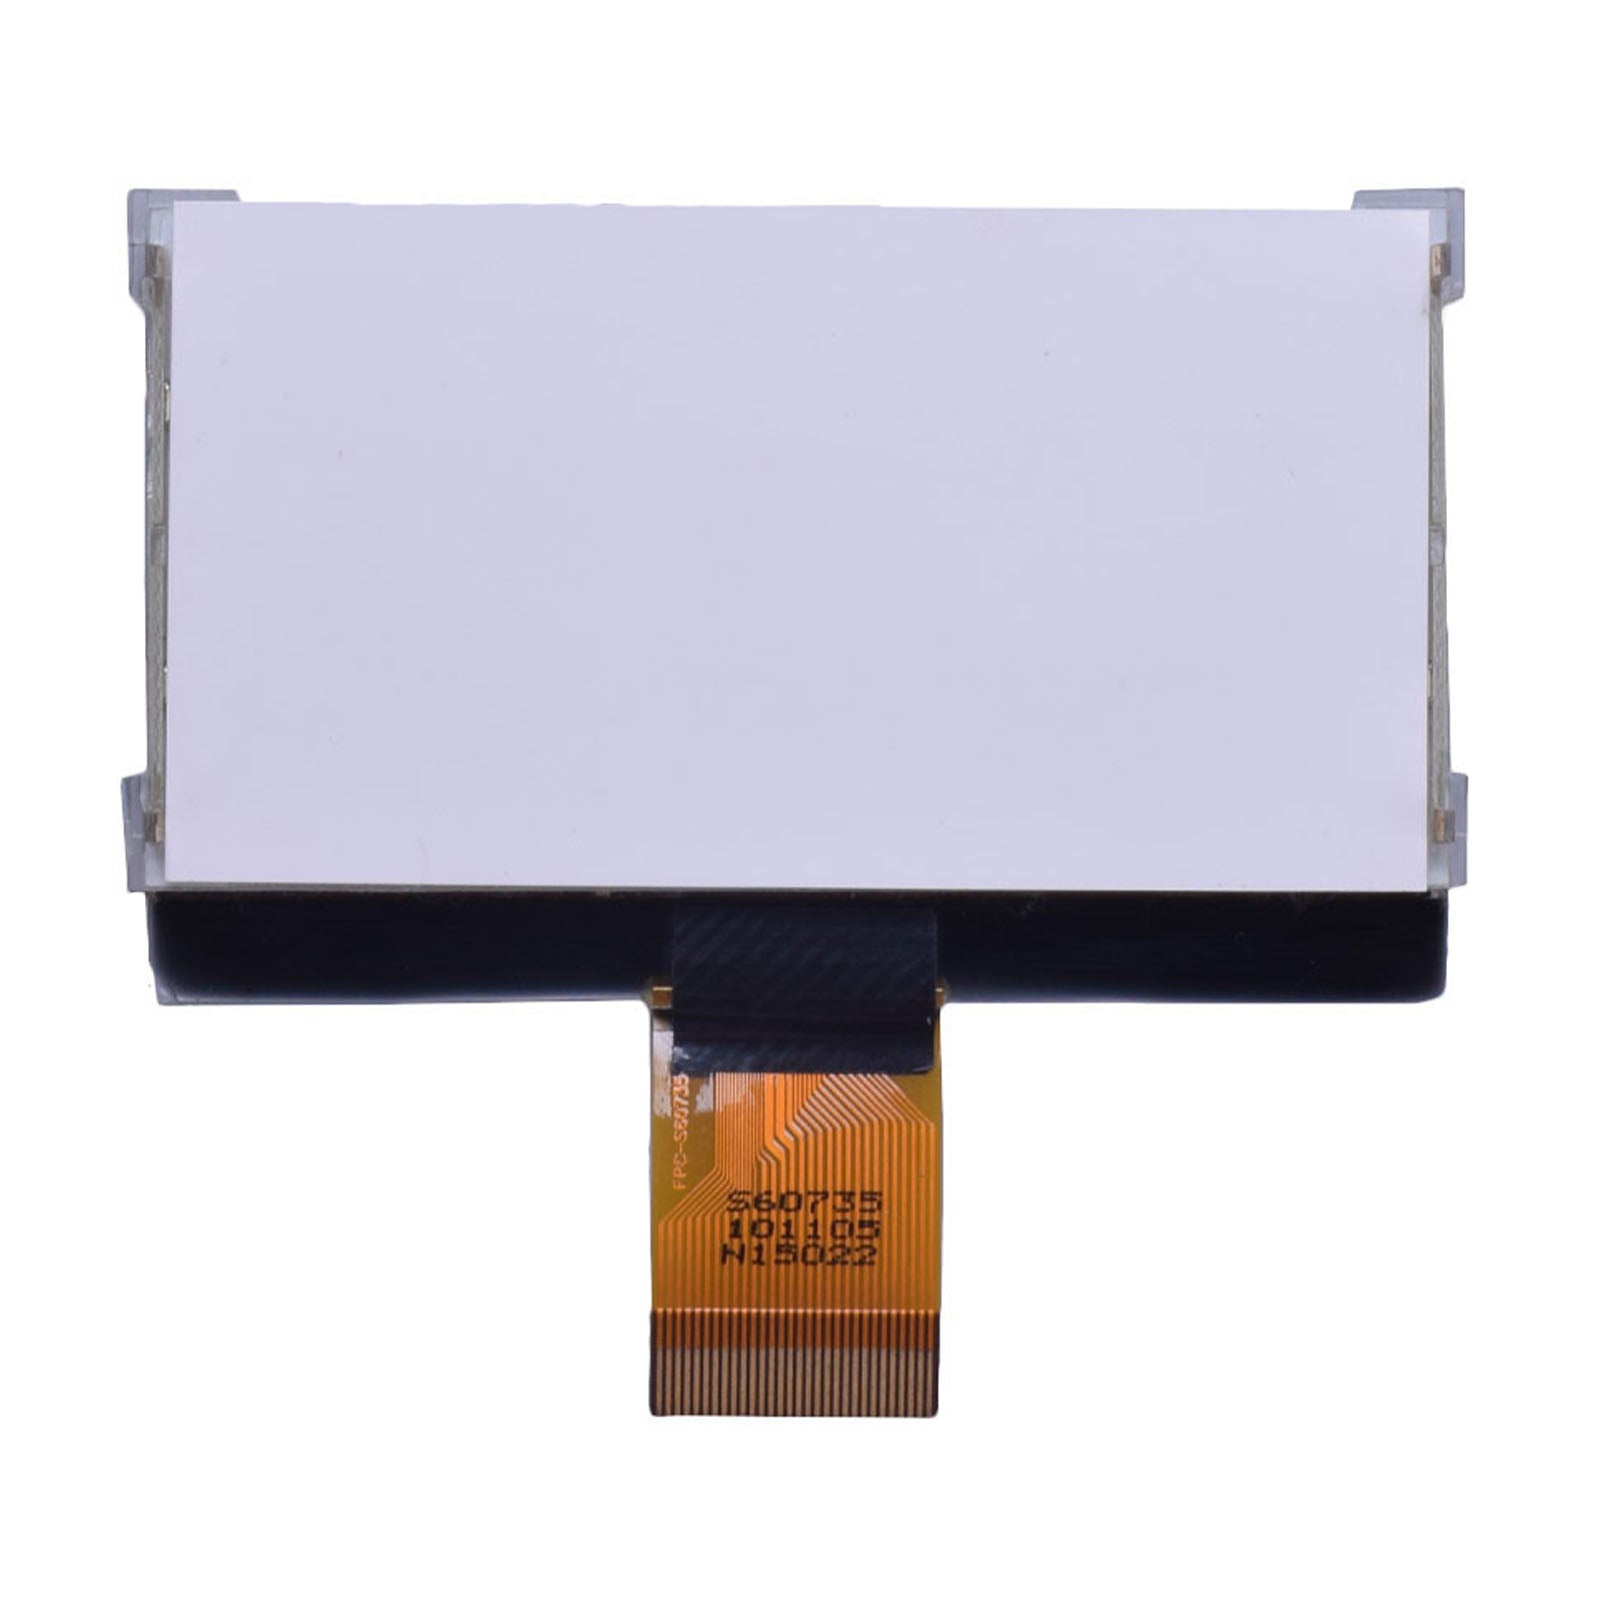 Back of 128x64 COG LCD 2.61 inch graphic display with MCU interface